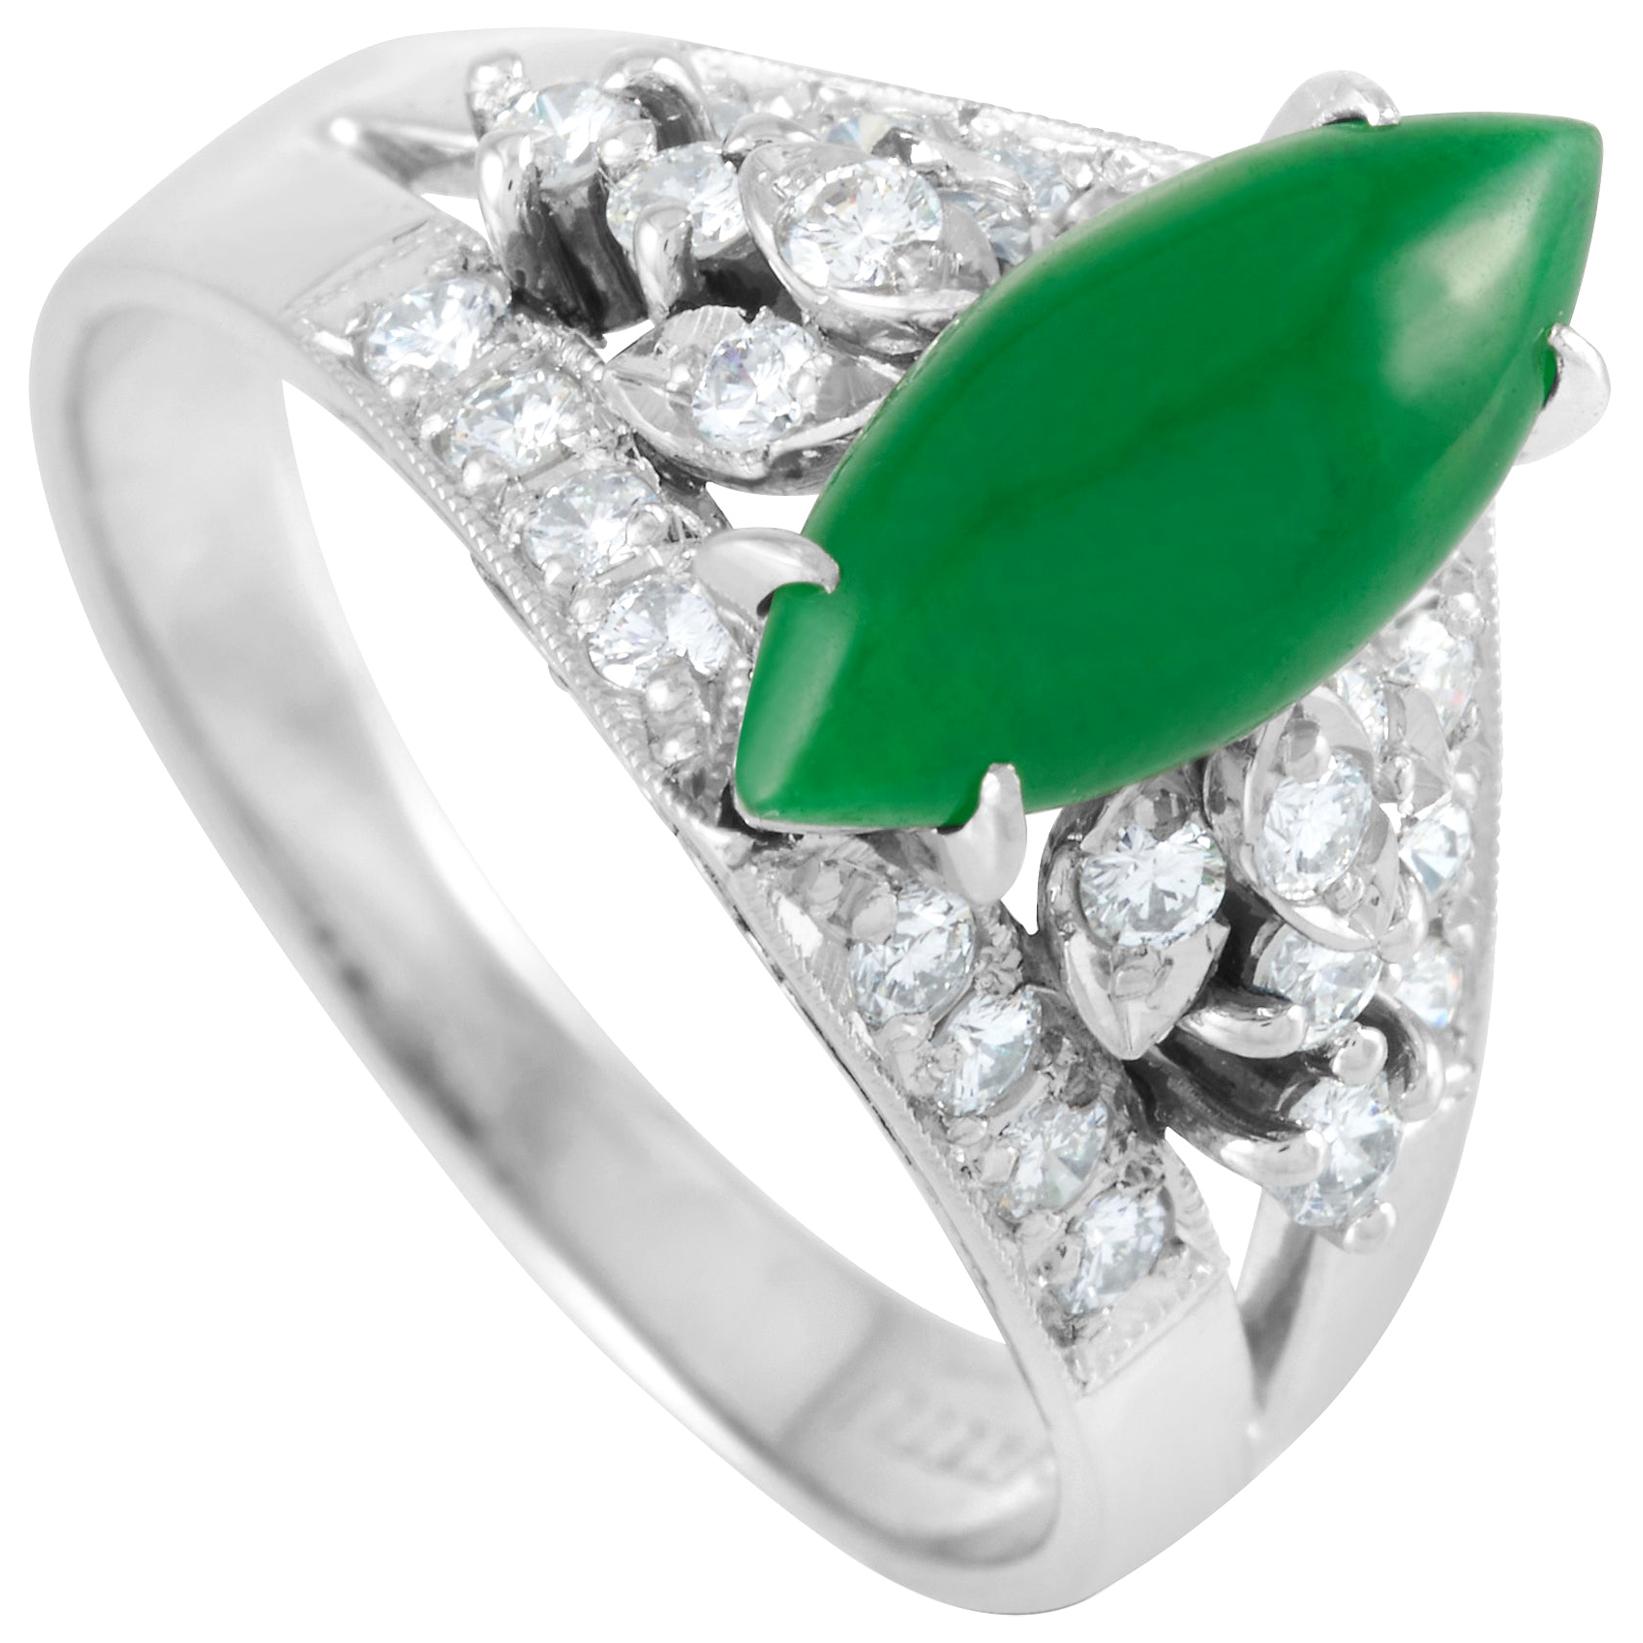 The Mikimoto Platinum 0.46 carat Diamond and Jade Ring has a regal presence and a vintage appeal. The platinum split shank band has its edges decorated with a channel of round diamonds framed by intricate milgrain borders. Sitting high atop on four